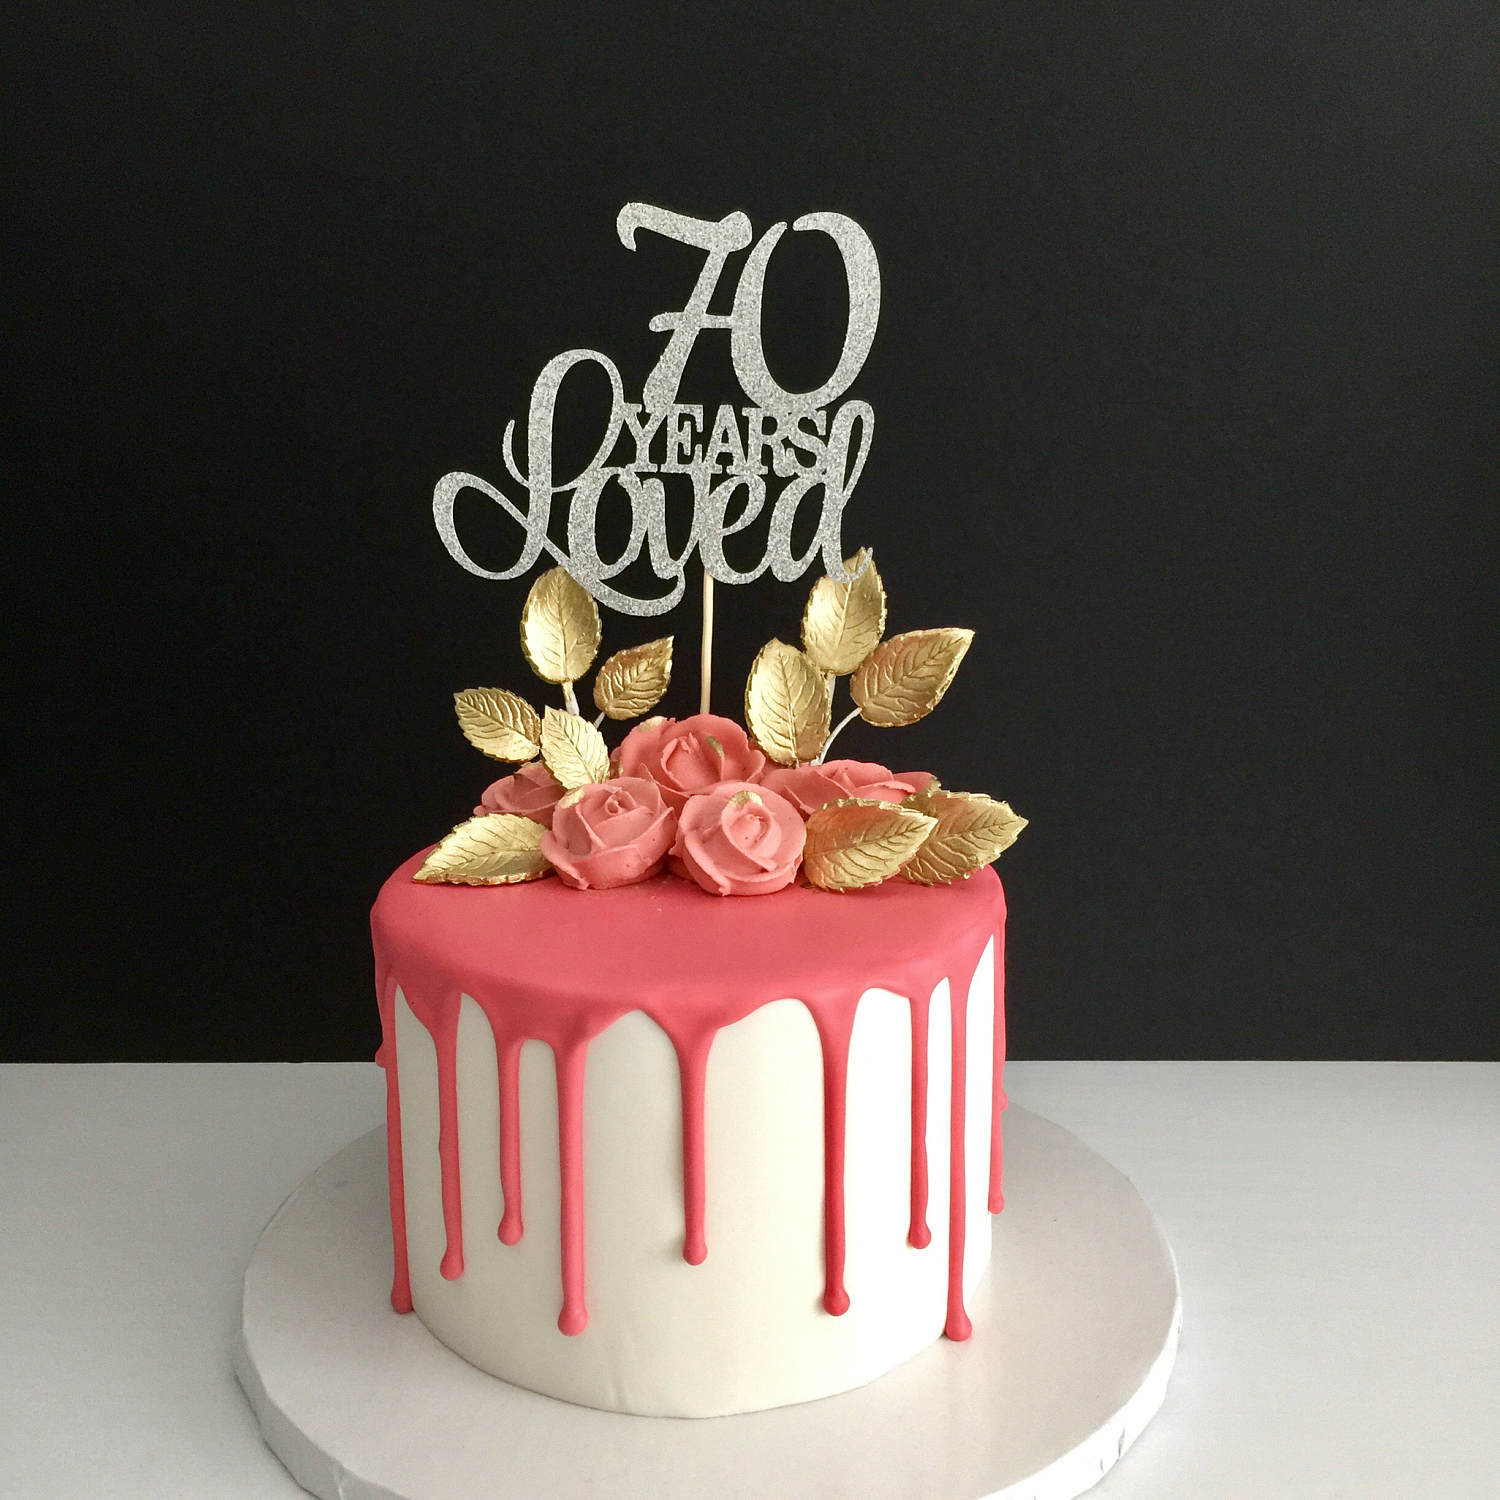 70 Birthday Cakes
 70 Years Loved Cake Topper 70th Birthday Cake Topper Happy